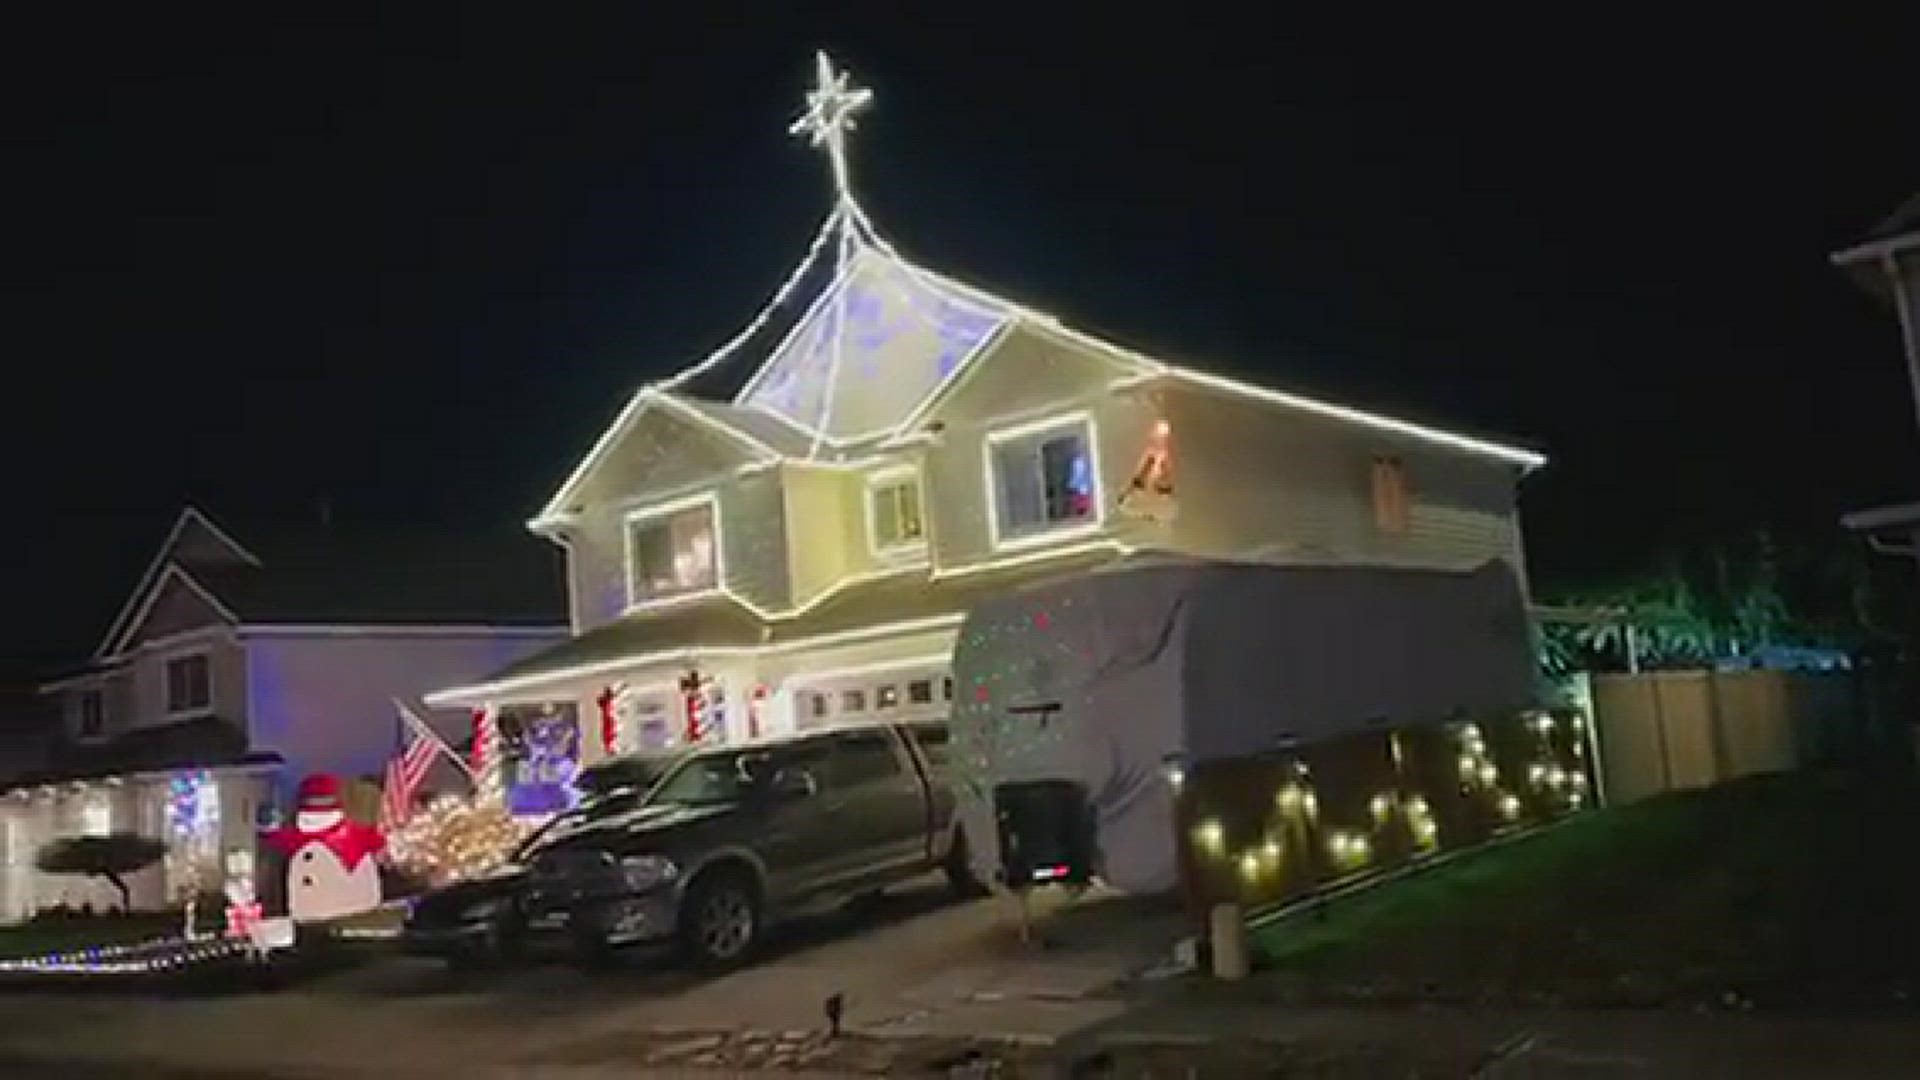 A video showing holiday lights on a home in Battle Ground, Washington on Dec. 21, 2022.
Credit: Jim Driehorst